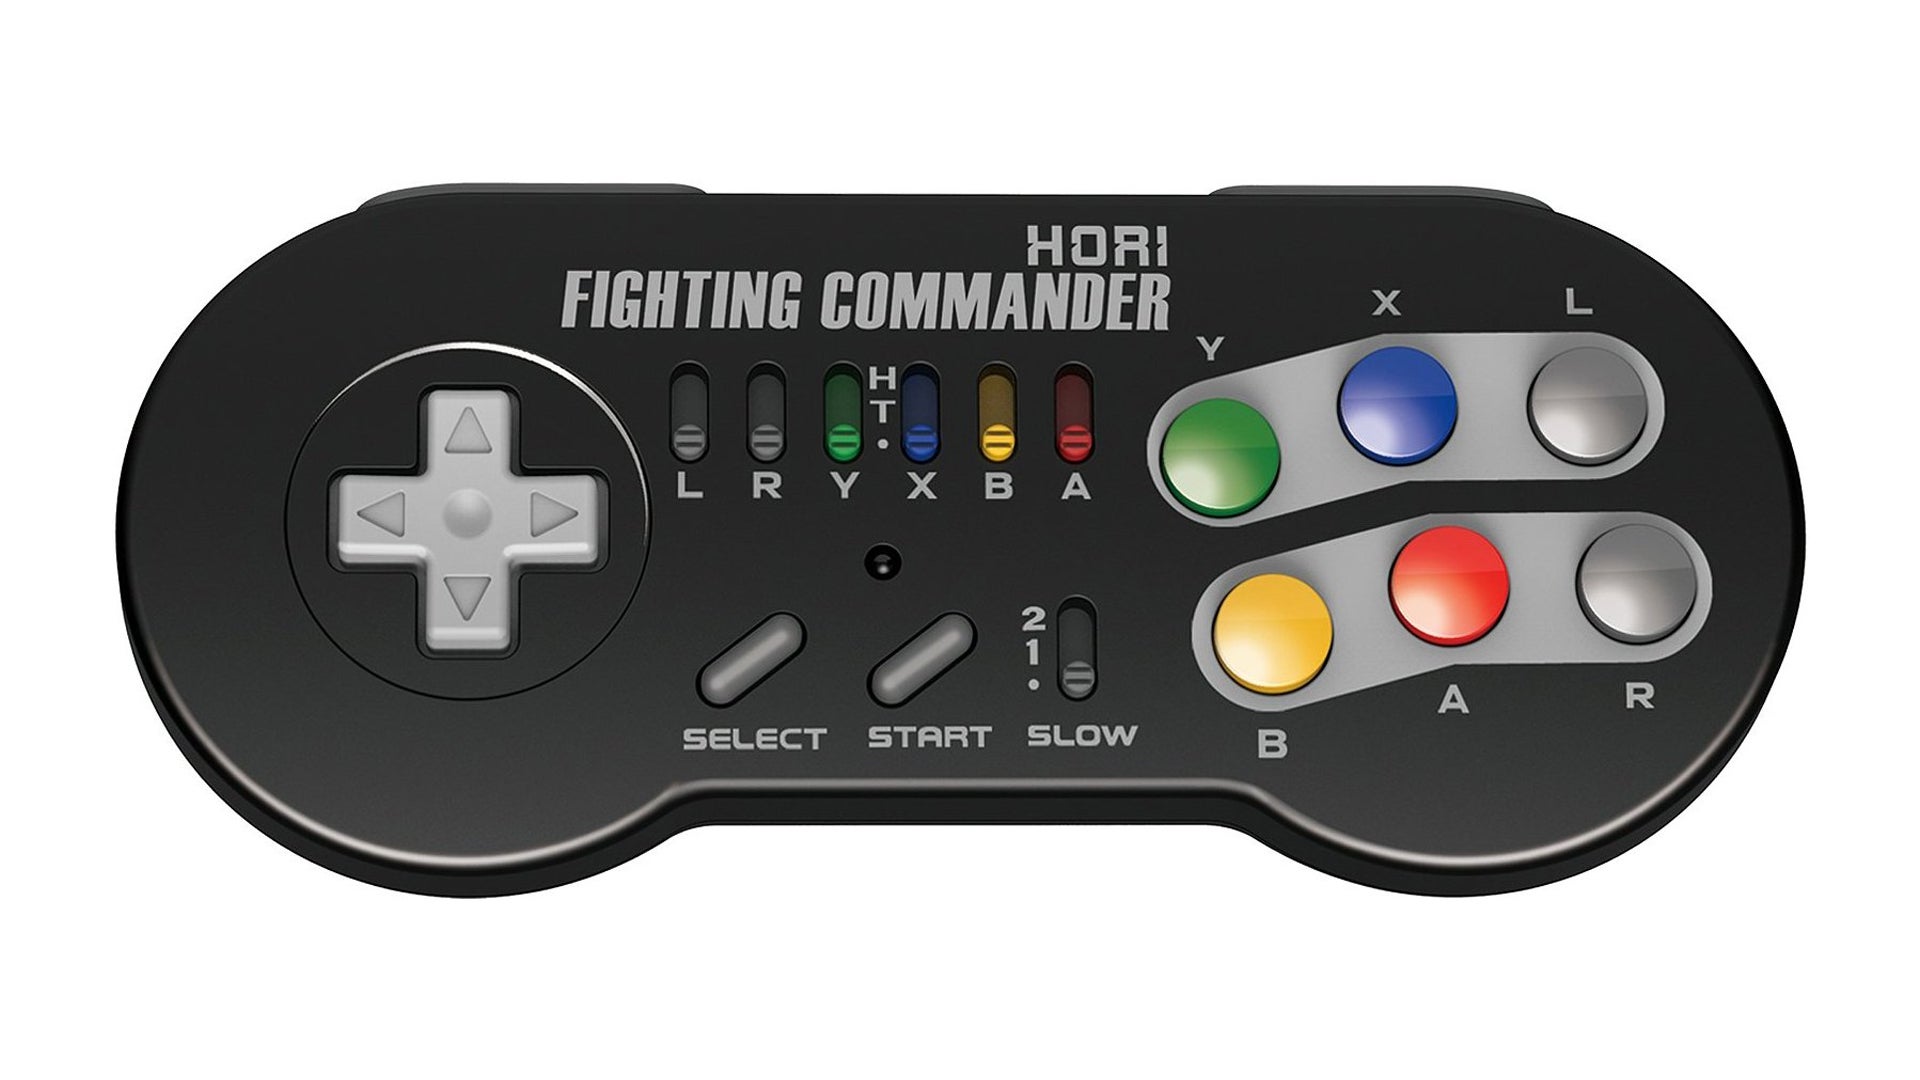 Image for Hori is bringing back its Fighting Commander controller for the SNES Classic Mini